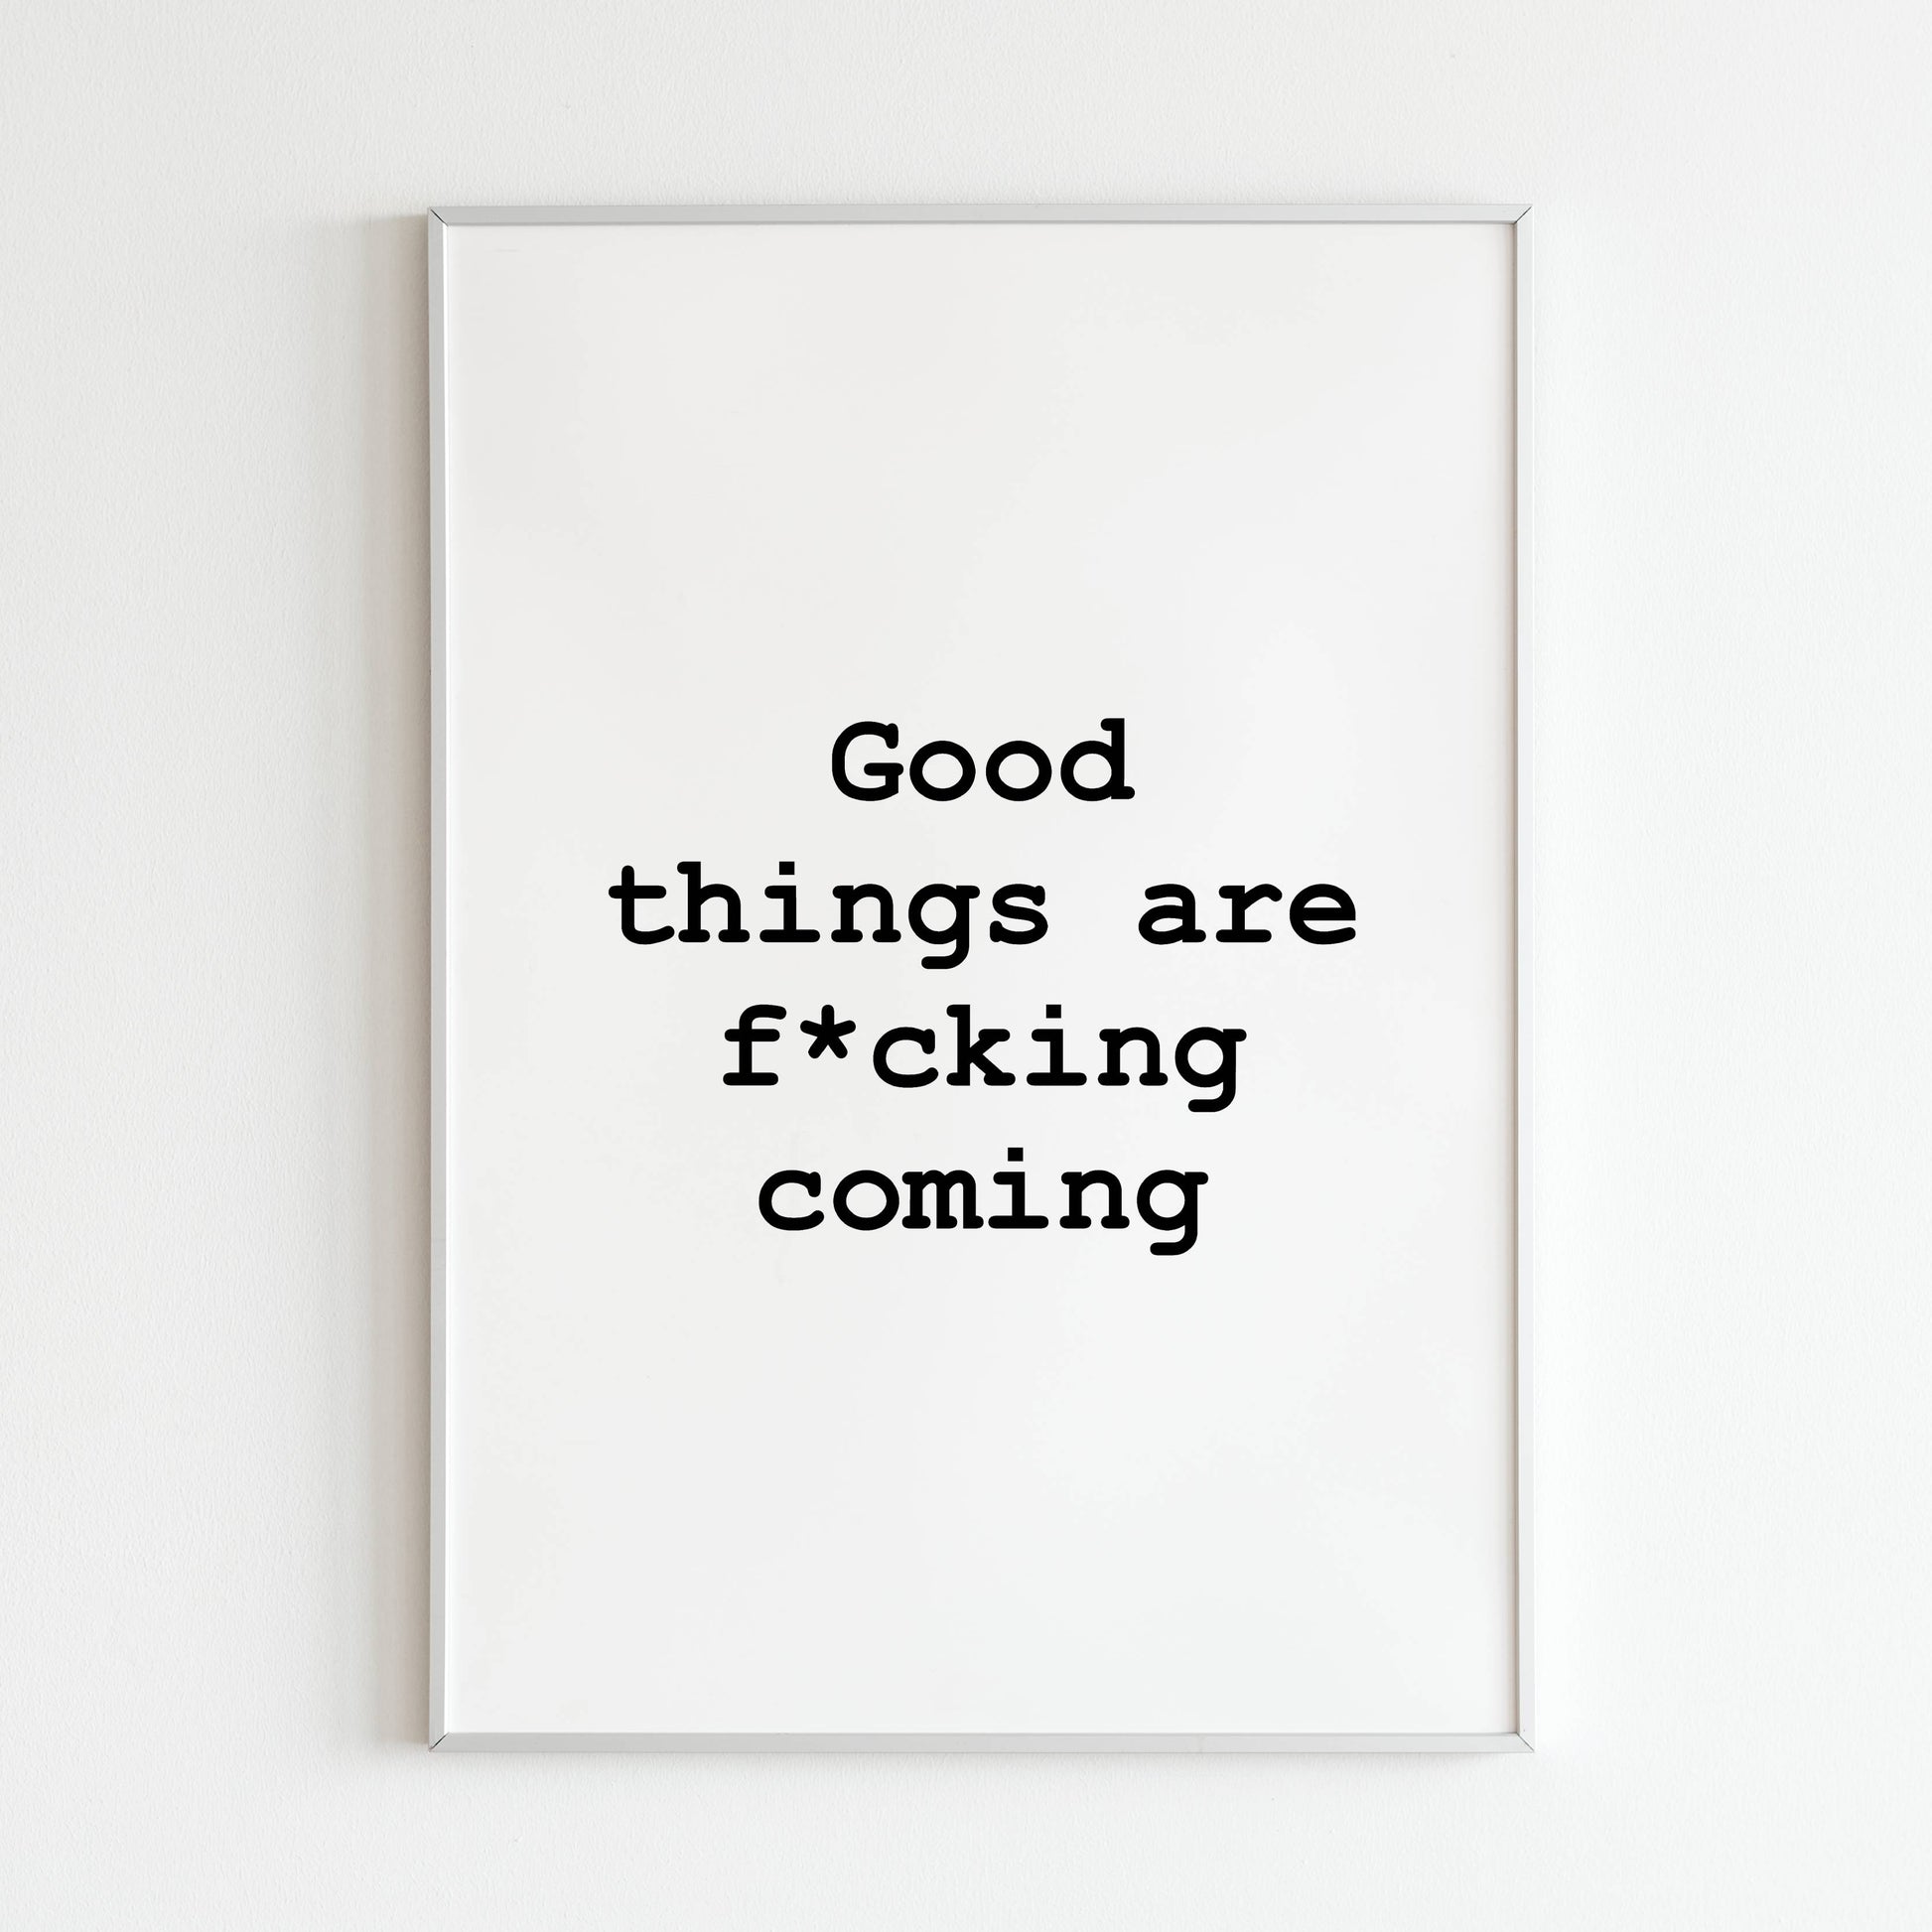 Downloadable inspirational wall art with a very positive message